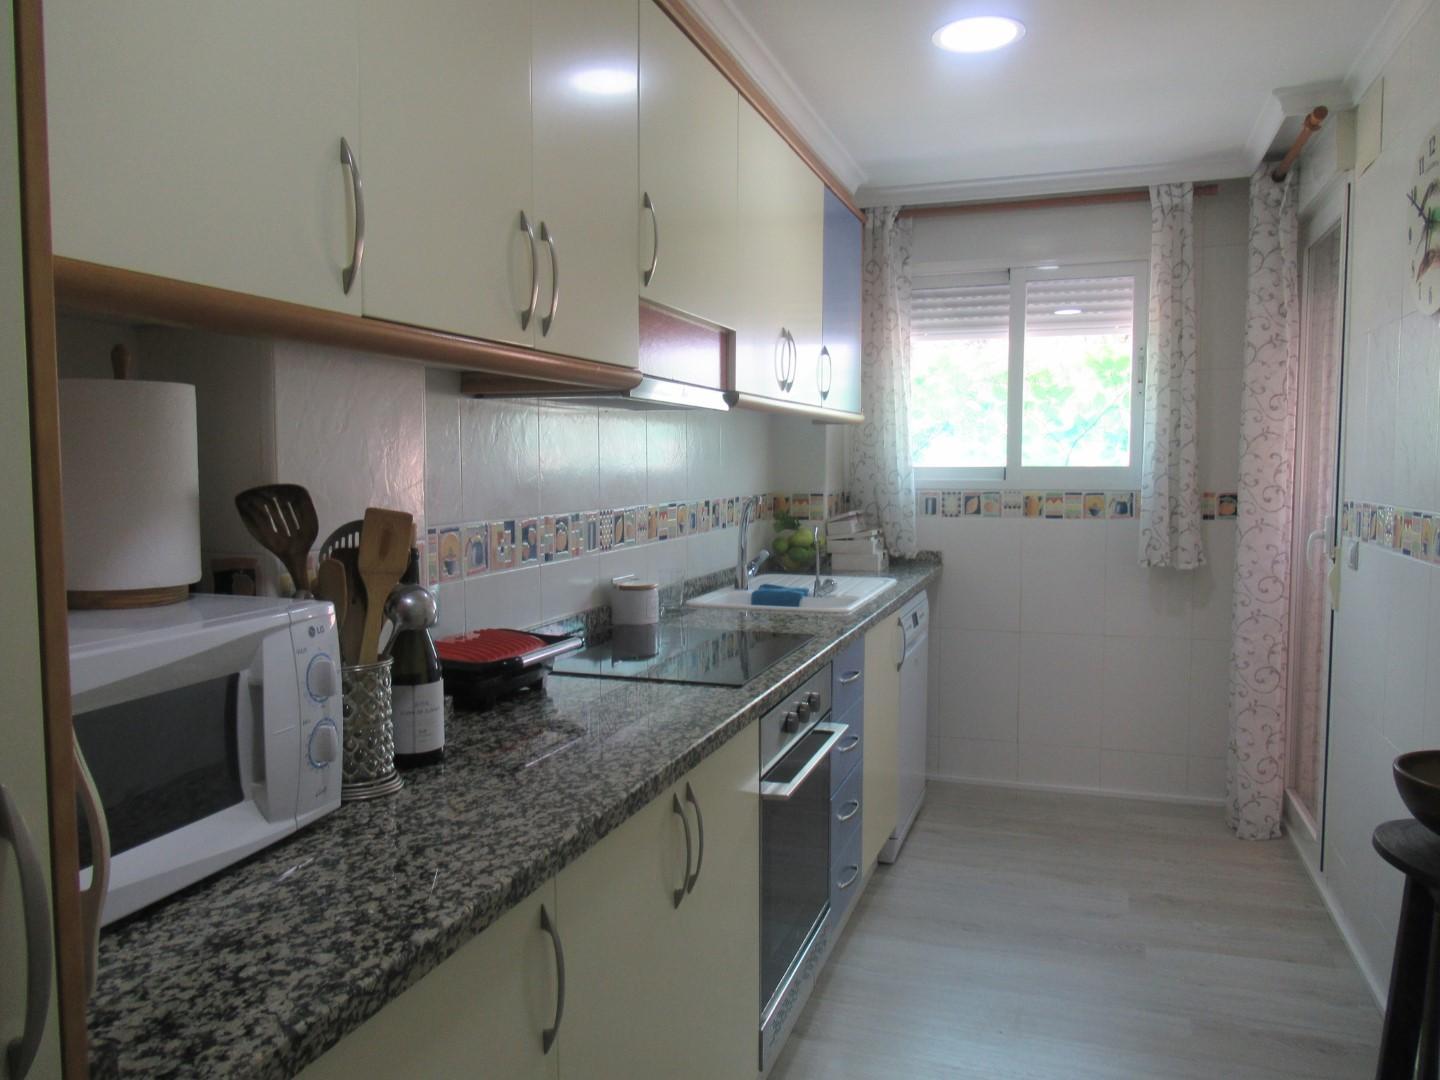 Apartment in DENIA 3 bedroom apartment for sale in DENIA with swimming pool